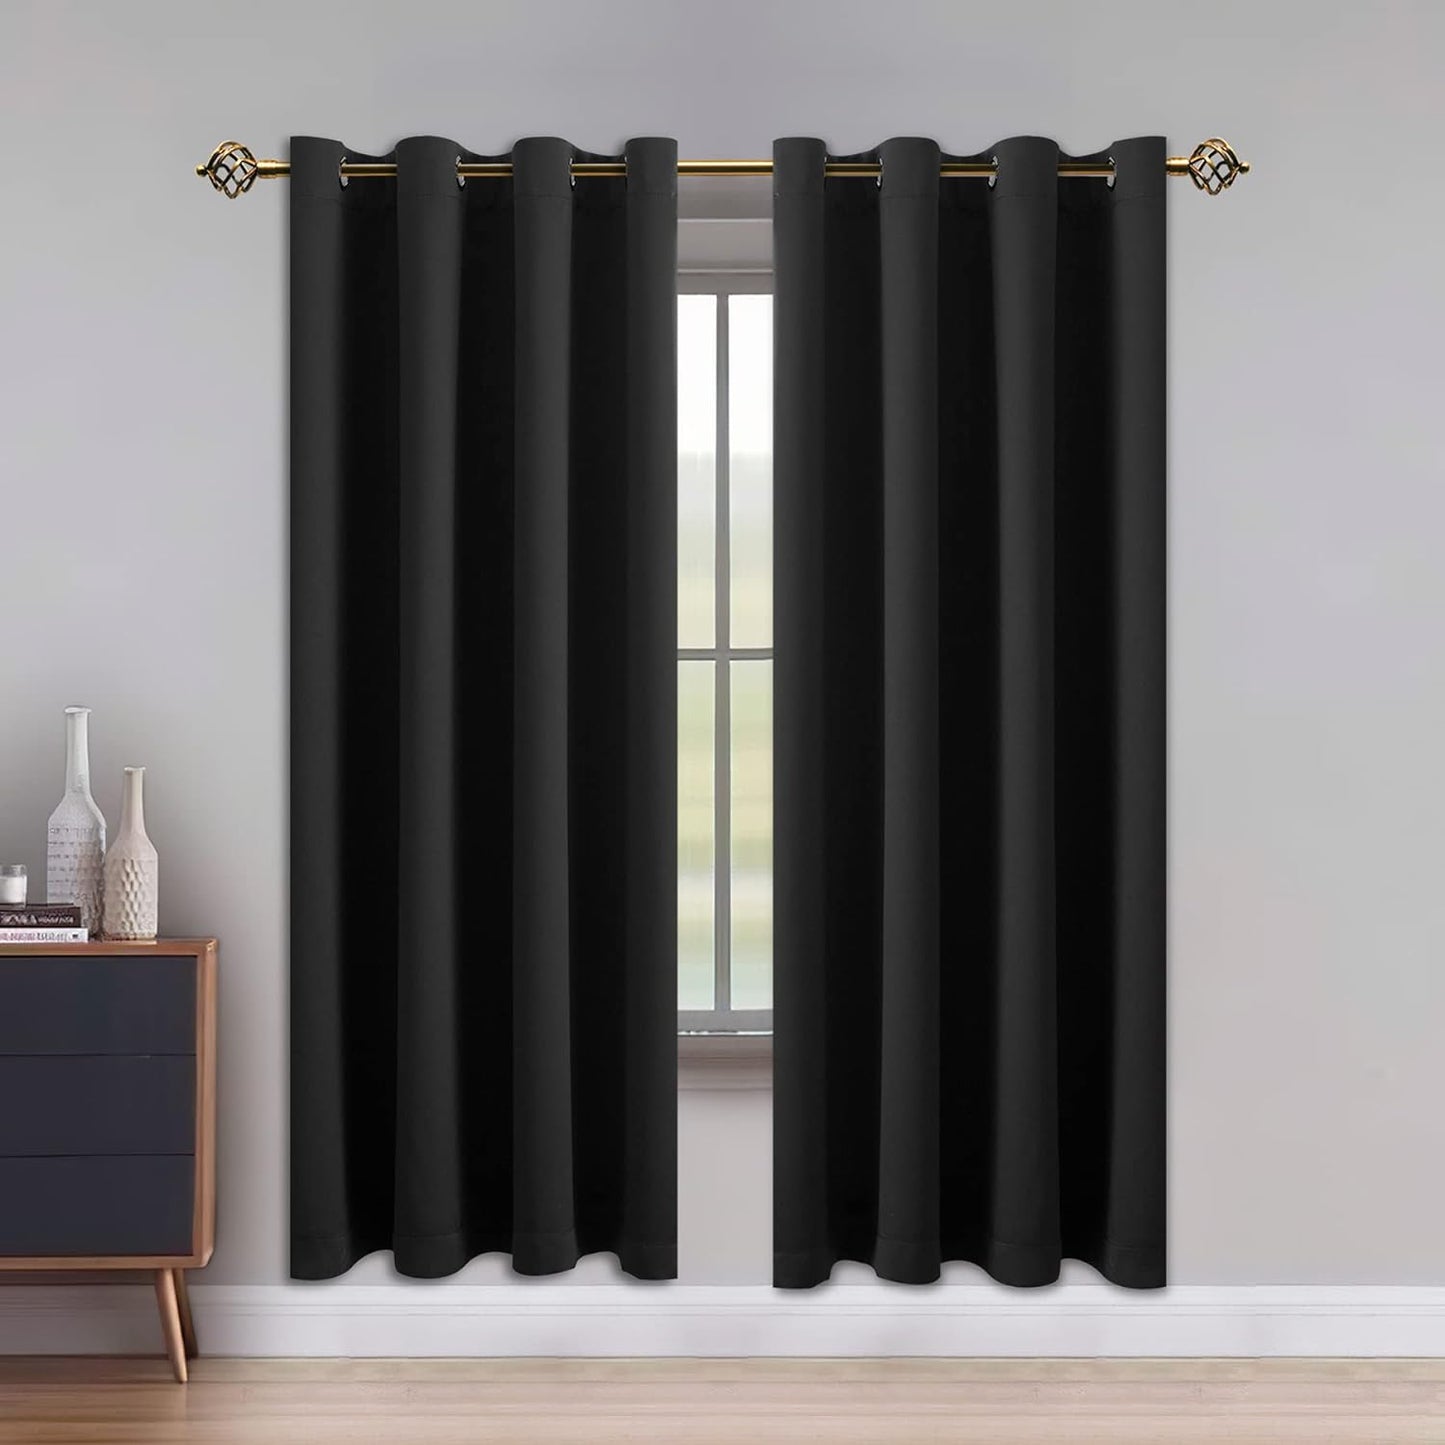 LUSHLEAF Blackout Curtains for Bedroom, Solid Thermal Insulated with Grommet Noise Reduction Window Drapes, Room Darkening Curtains for Living Room, 2 Panels, 52 X 63 Inch Grey  SHEEROOM Black 52 X 84 Inch 